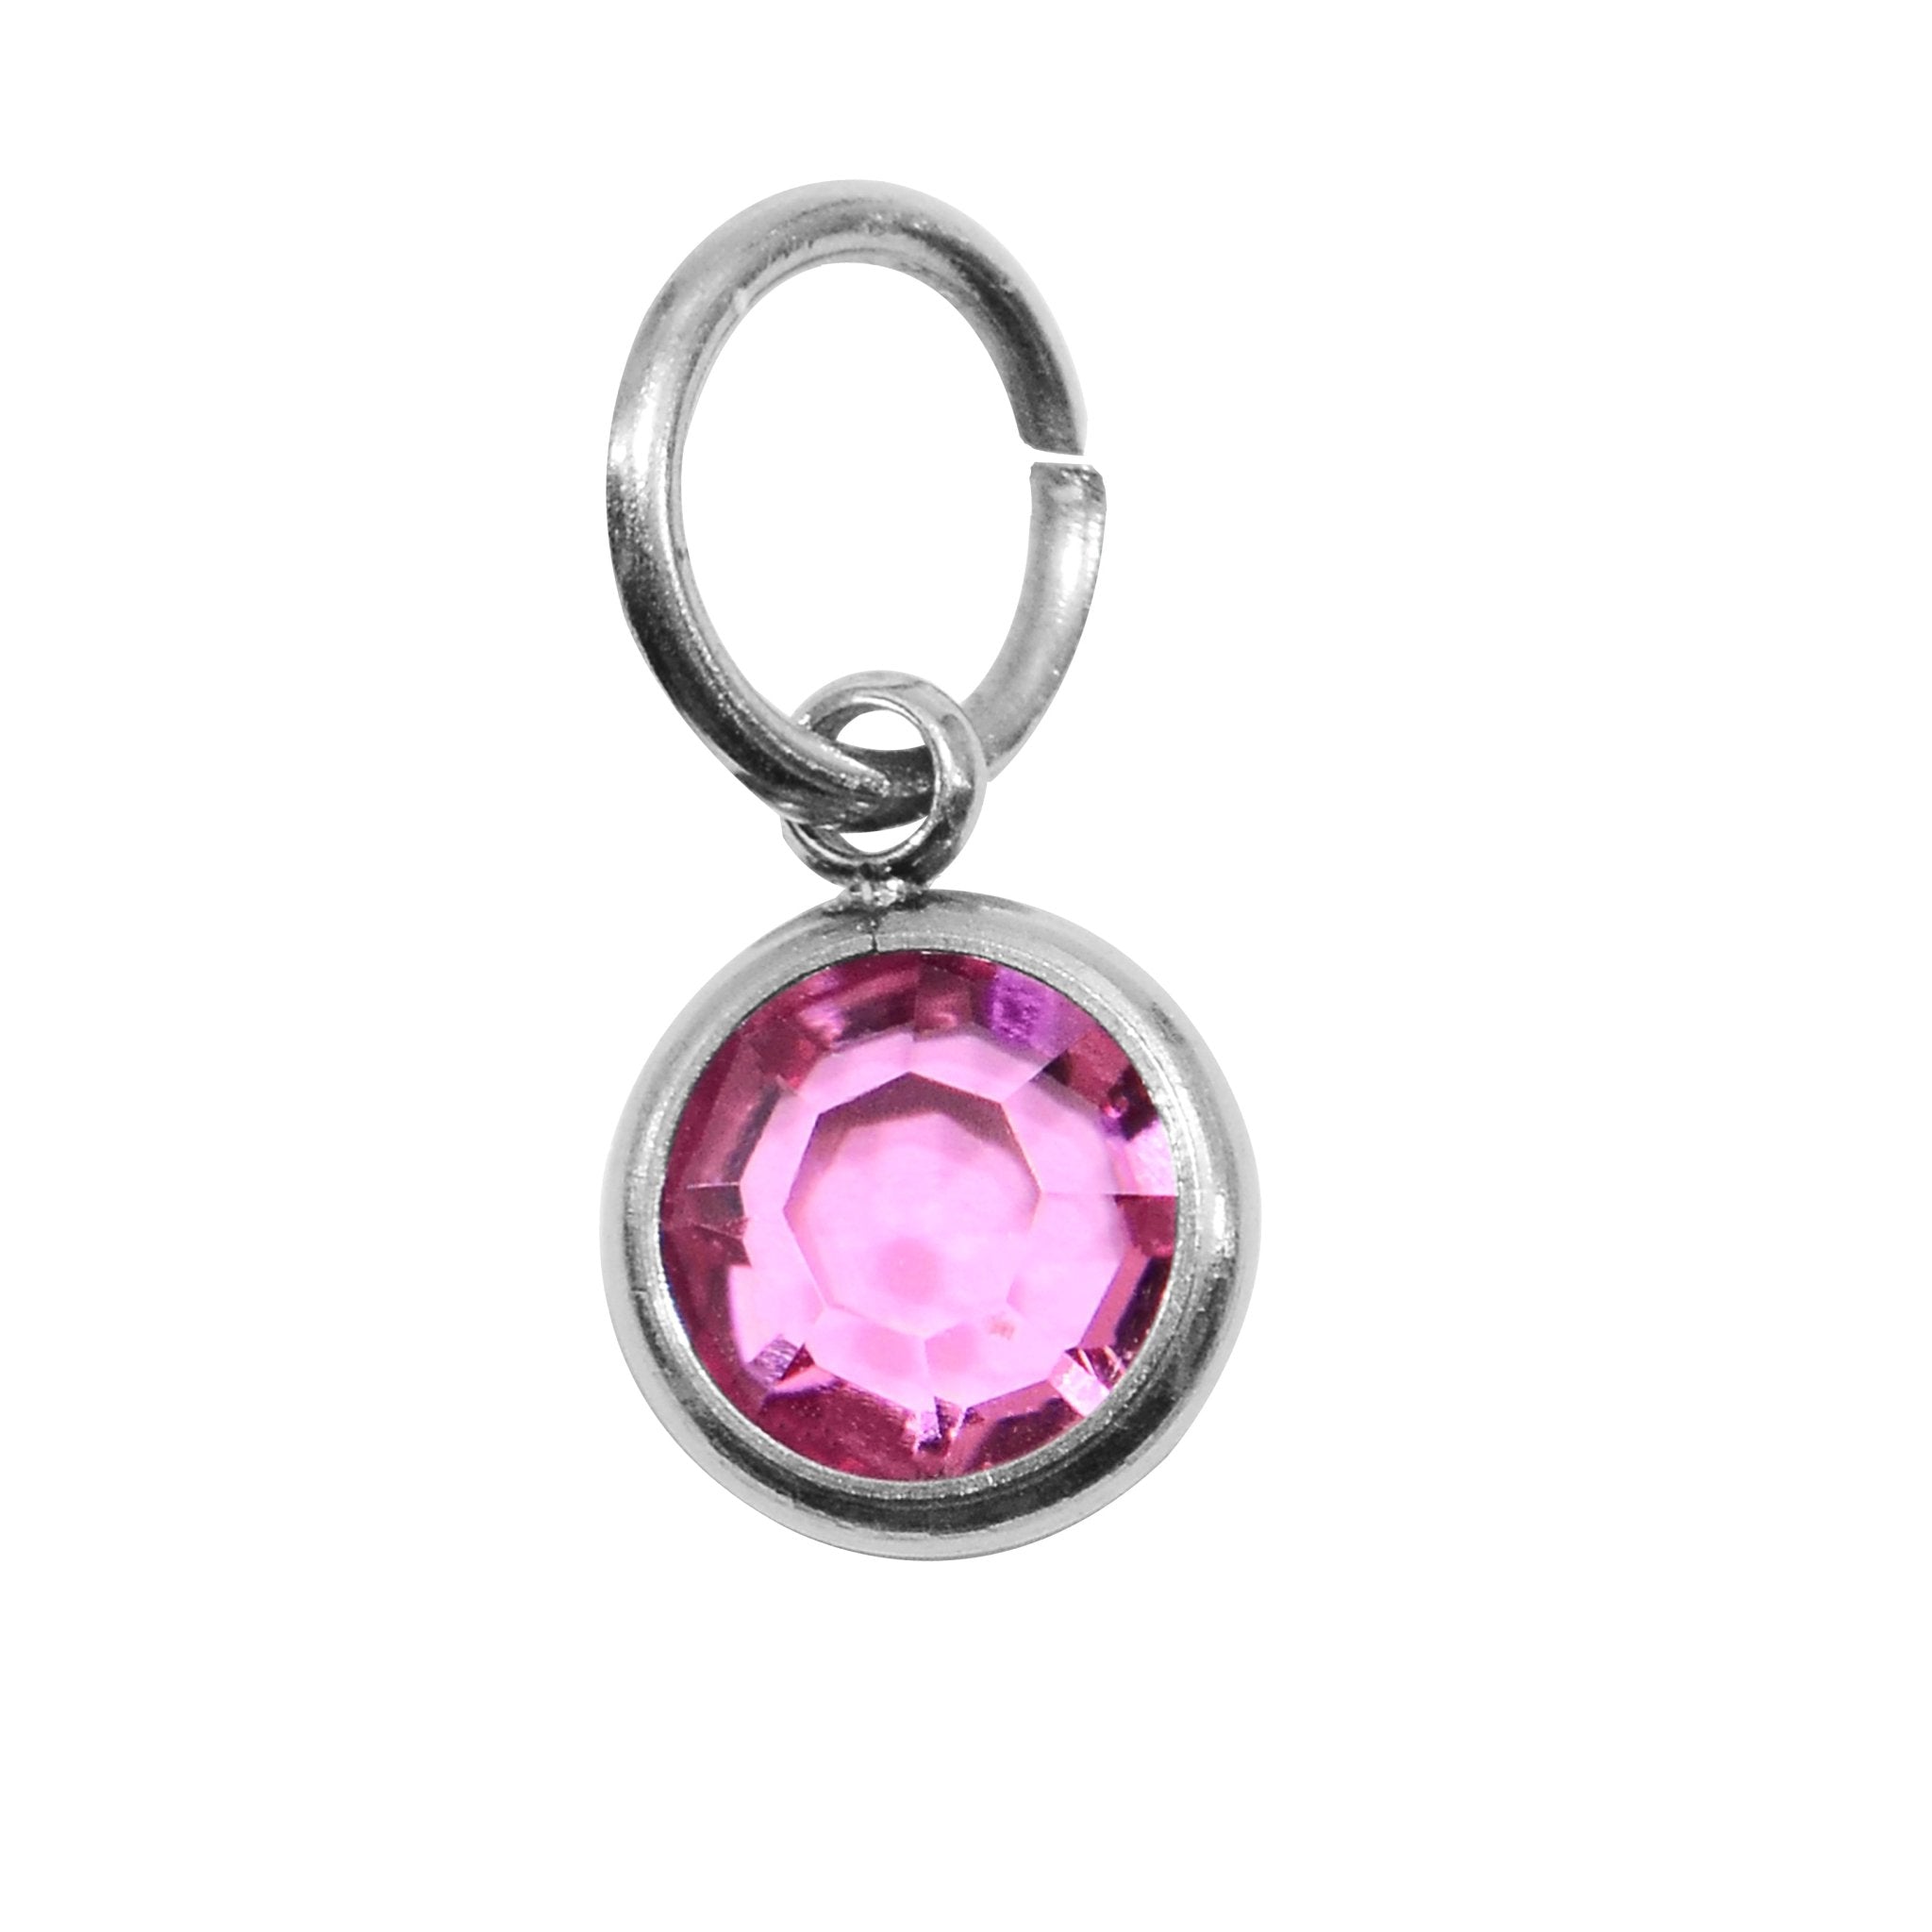 10th SILVER Hanging Birthstone Charm (Optional) - Options Variants